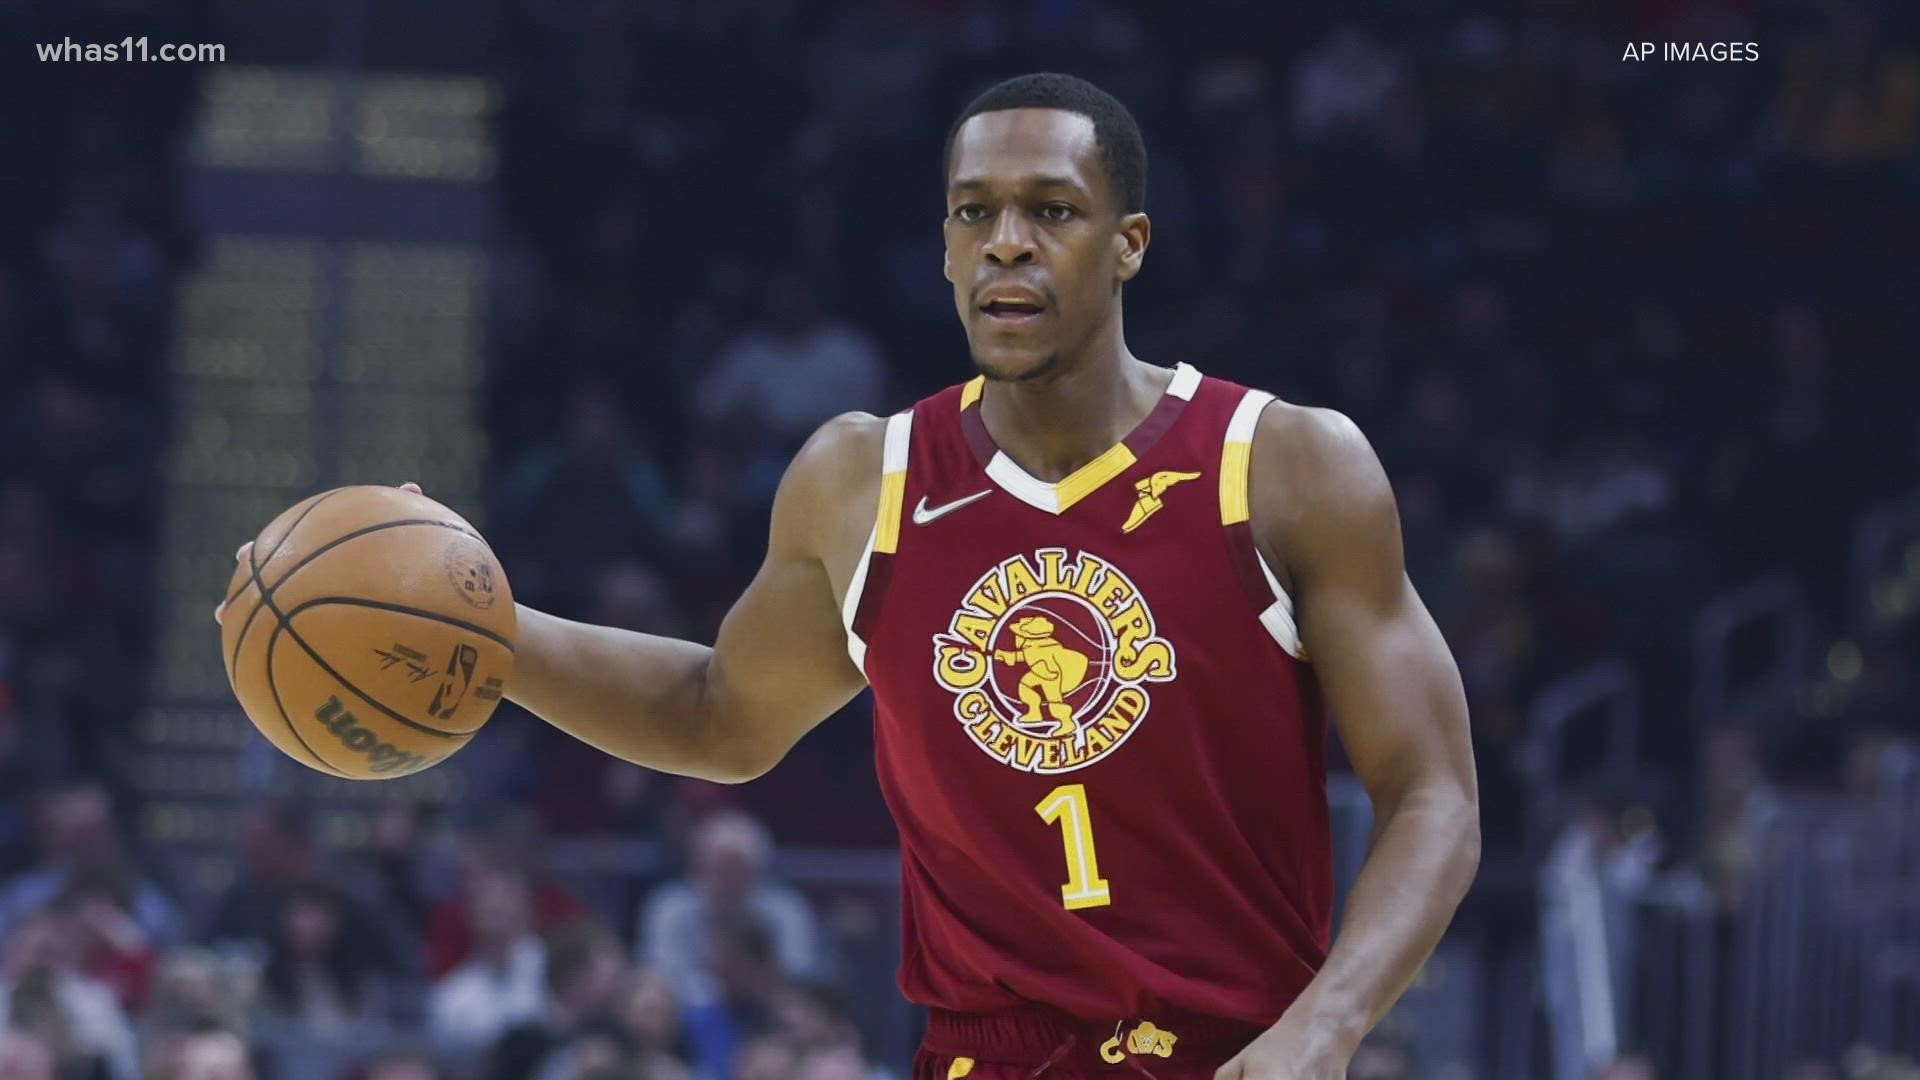 A Louisville woman filed an emergency protective order against Rondo in May, alleging he pulled out a gun and threatened her life.